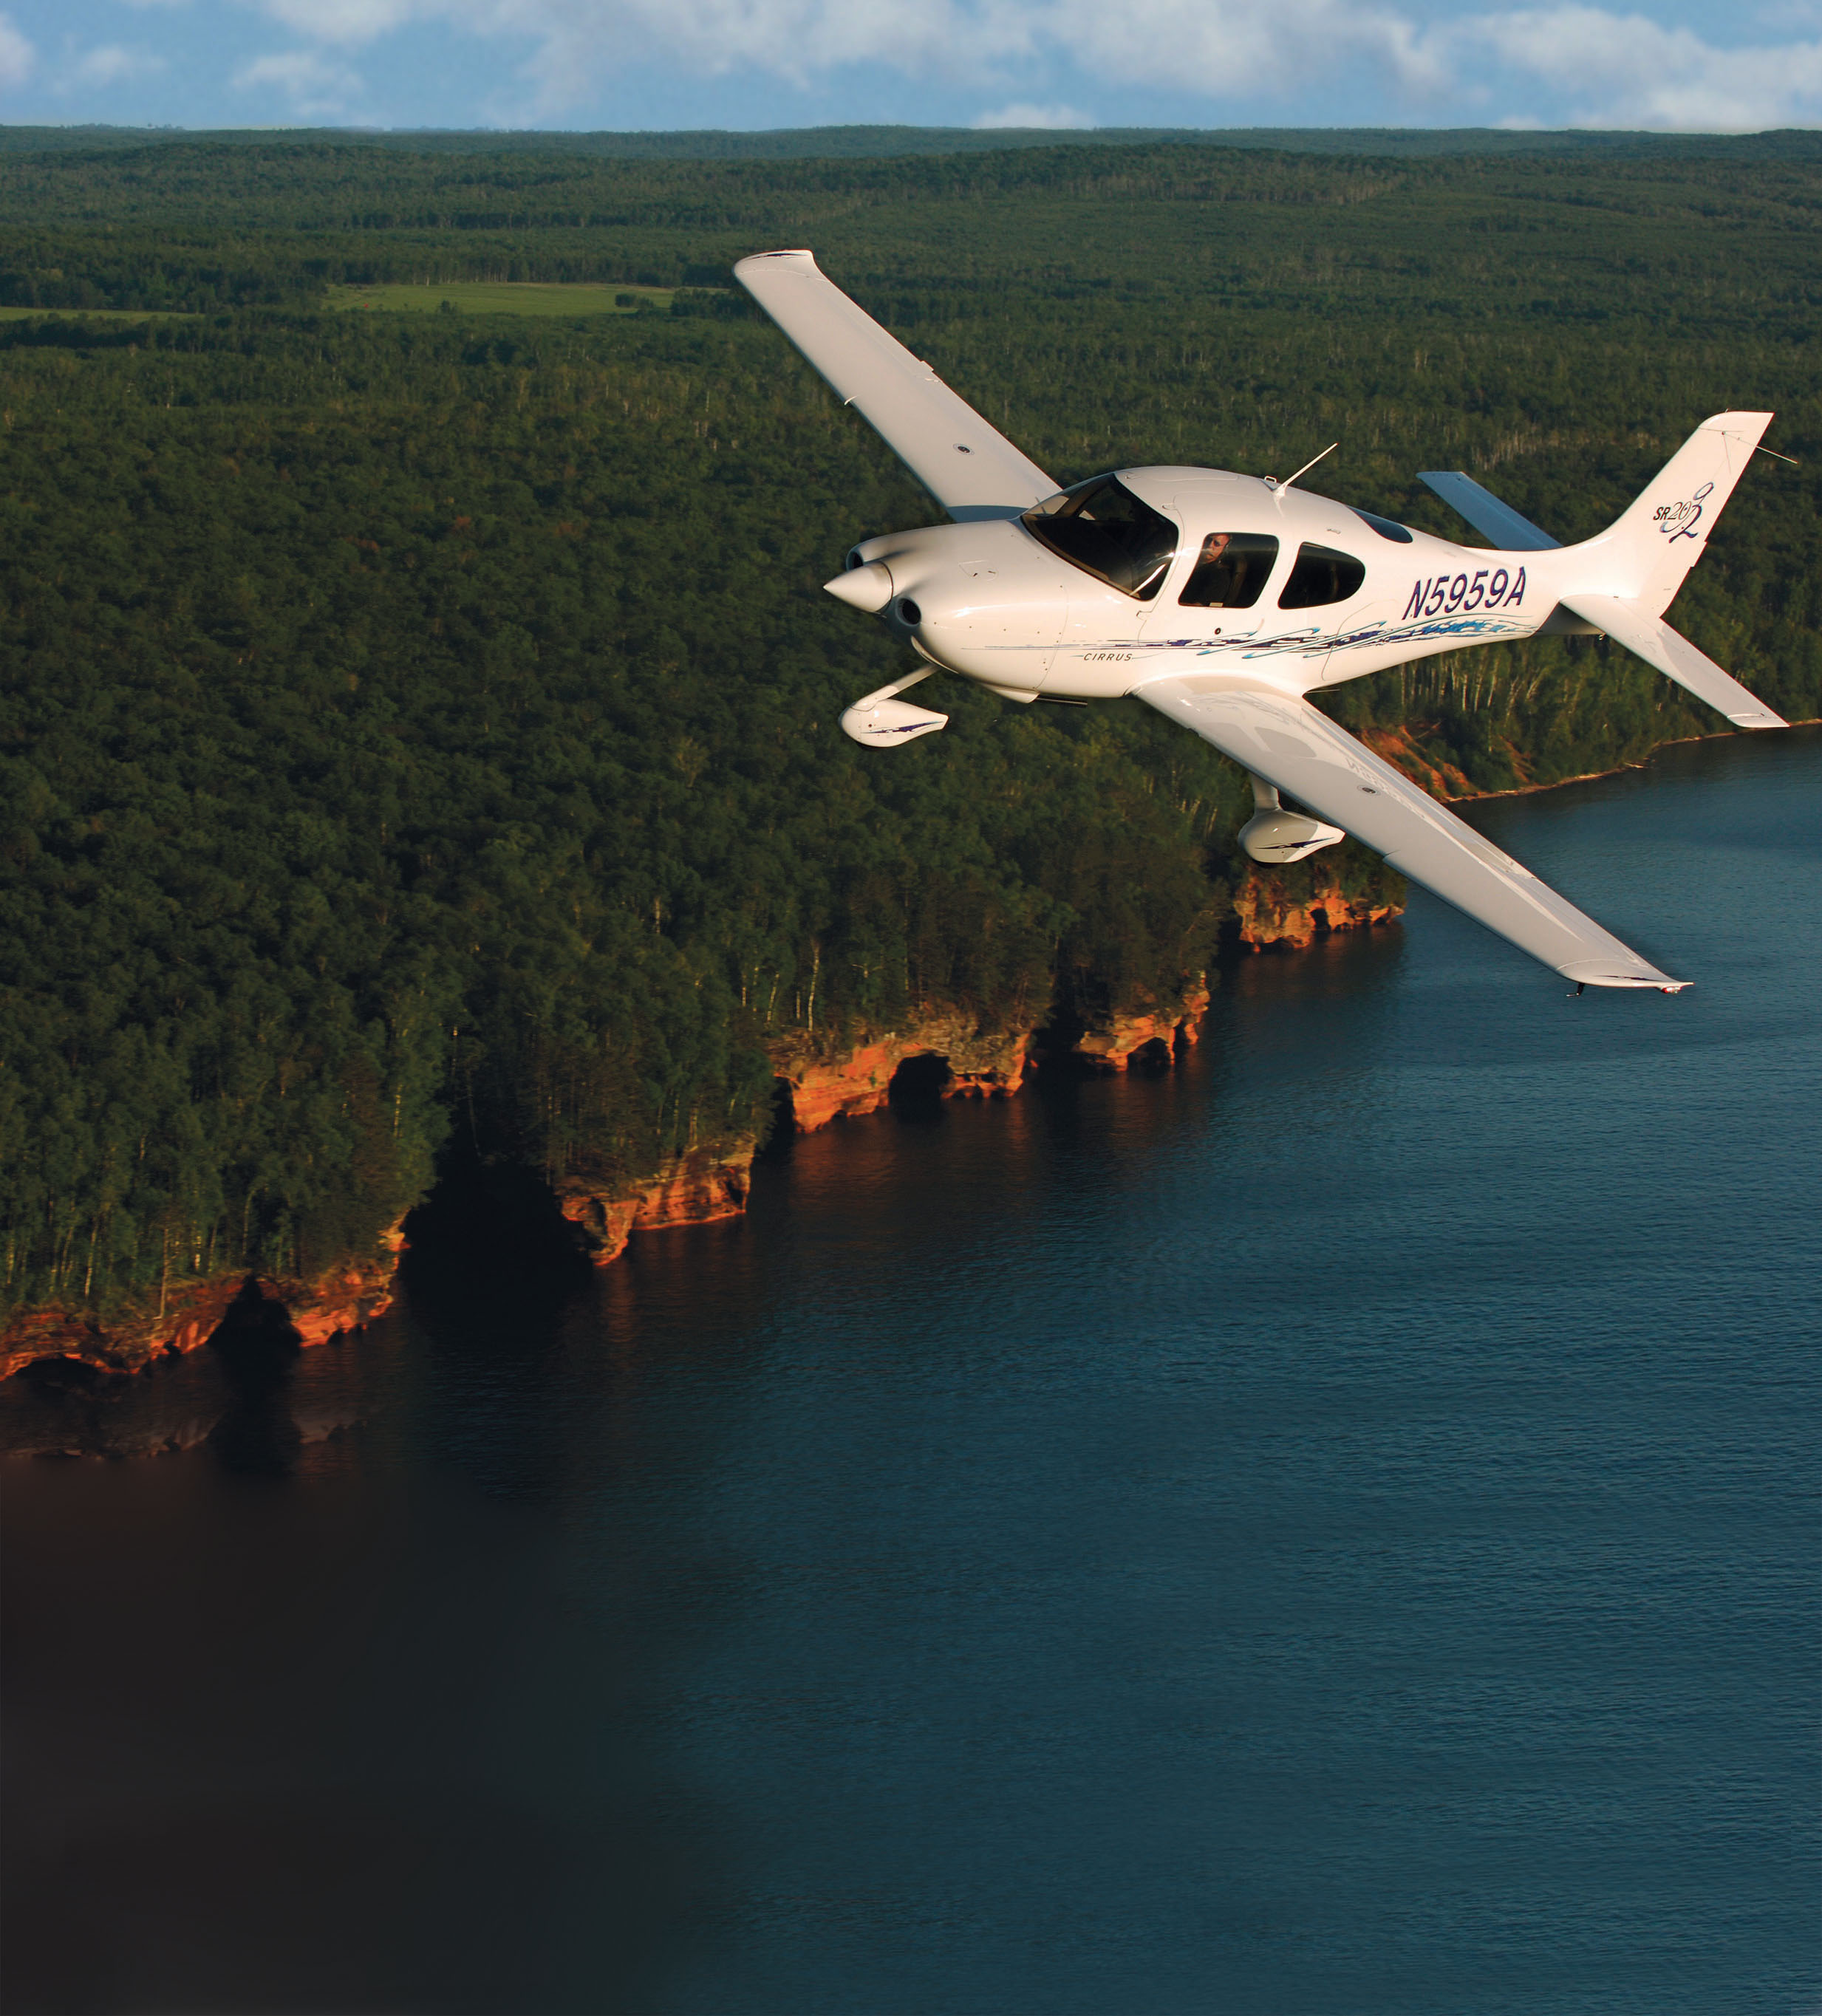 Cirrus Aircraft Insurance from Aviation Insurance Resources